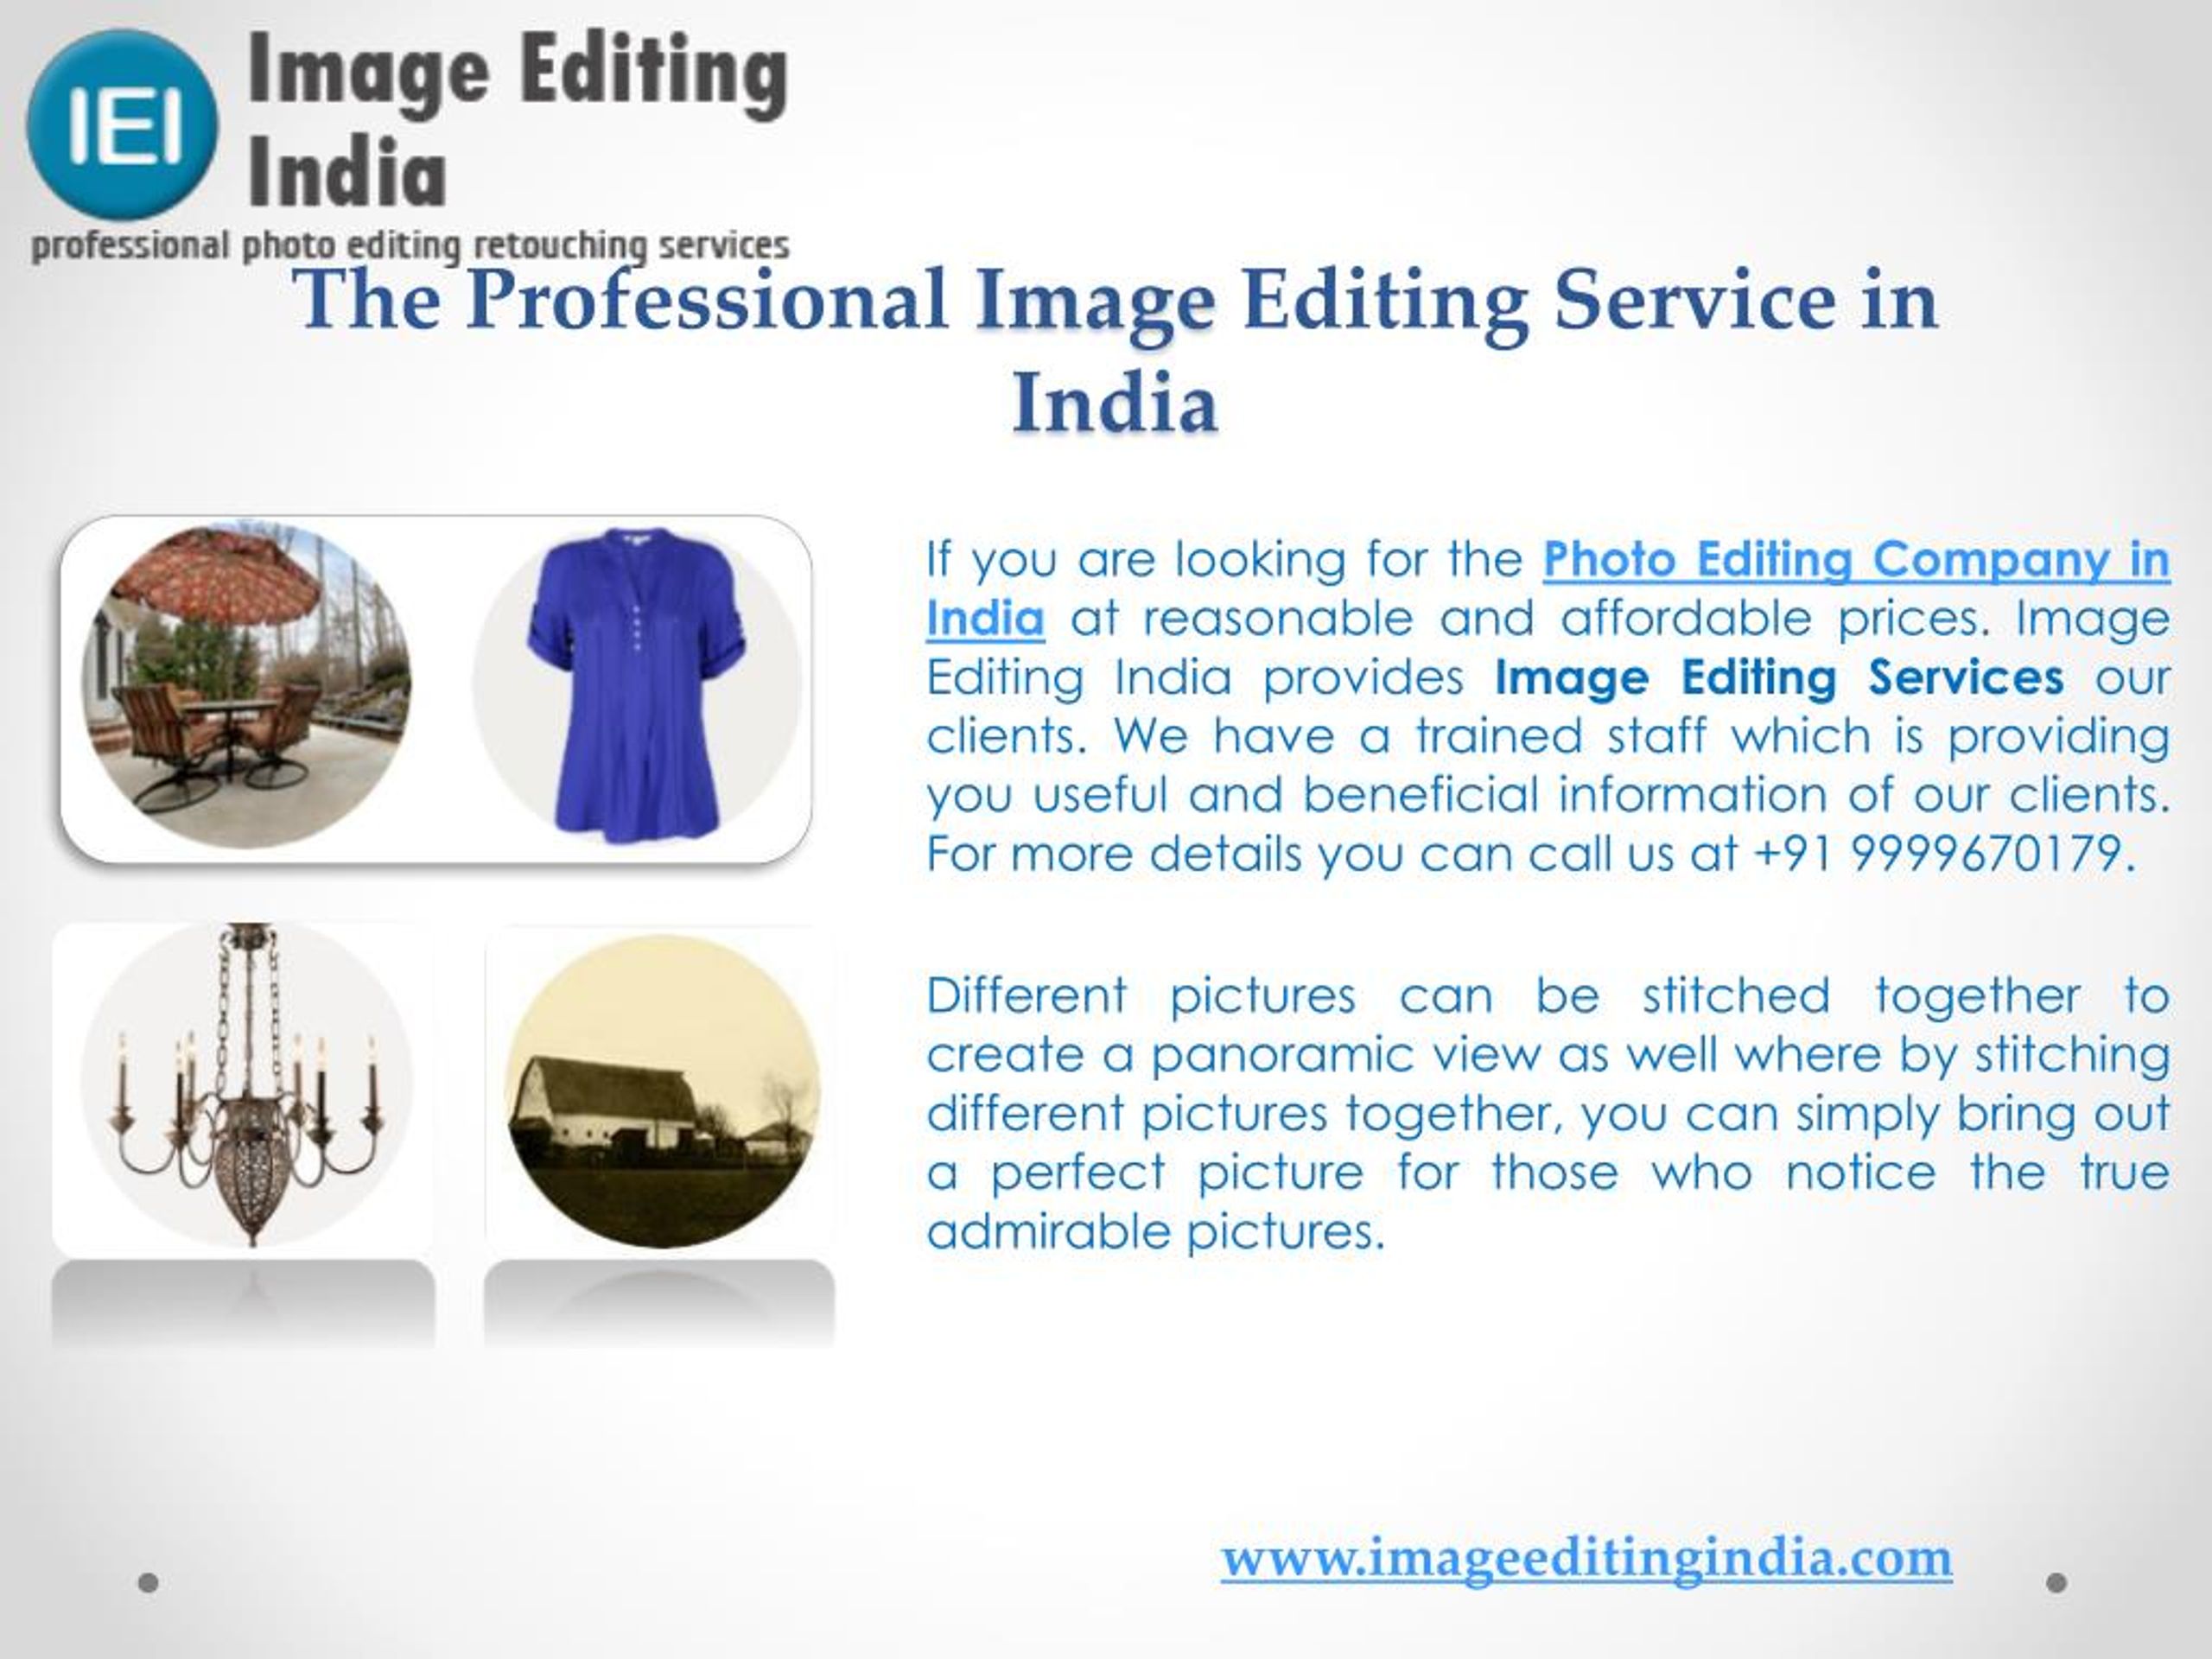 Editing service in india